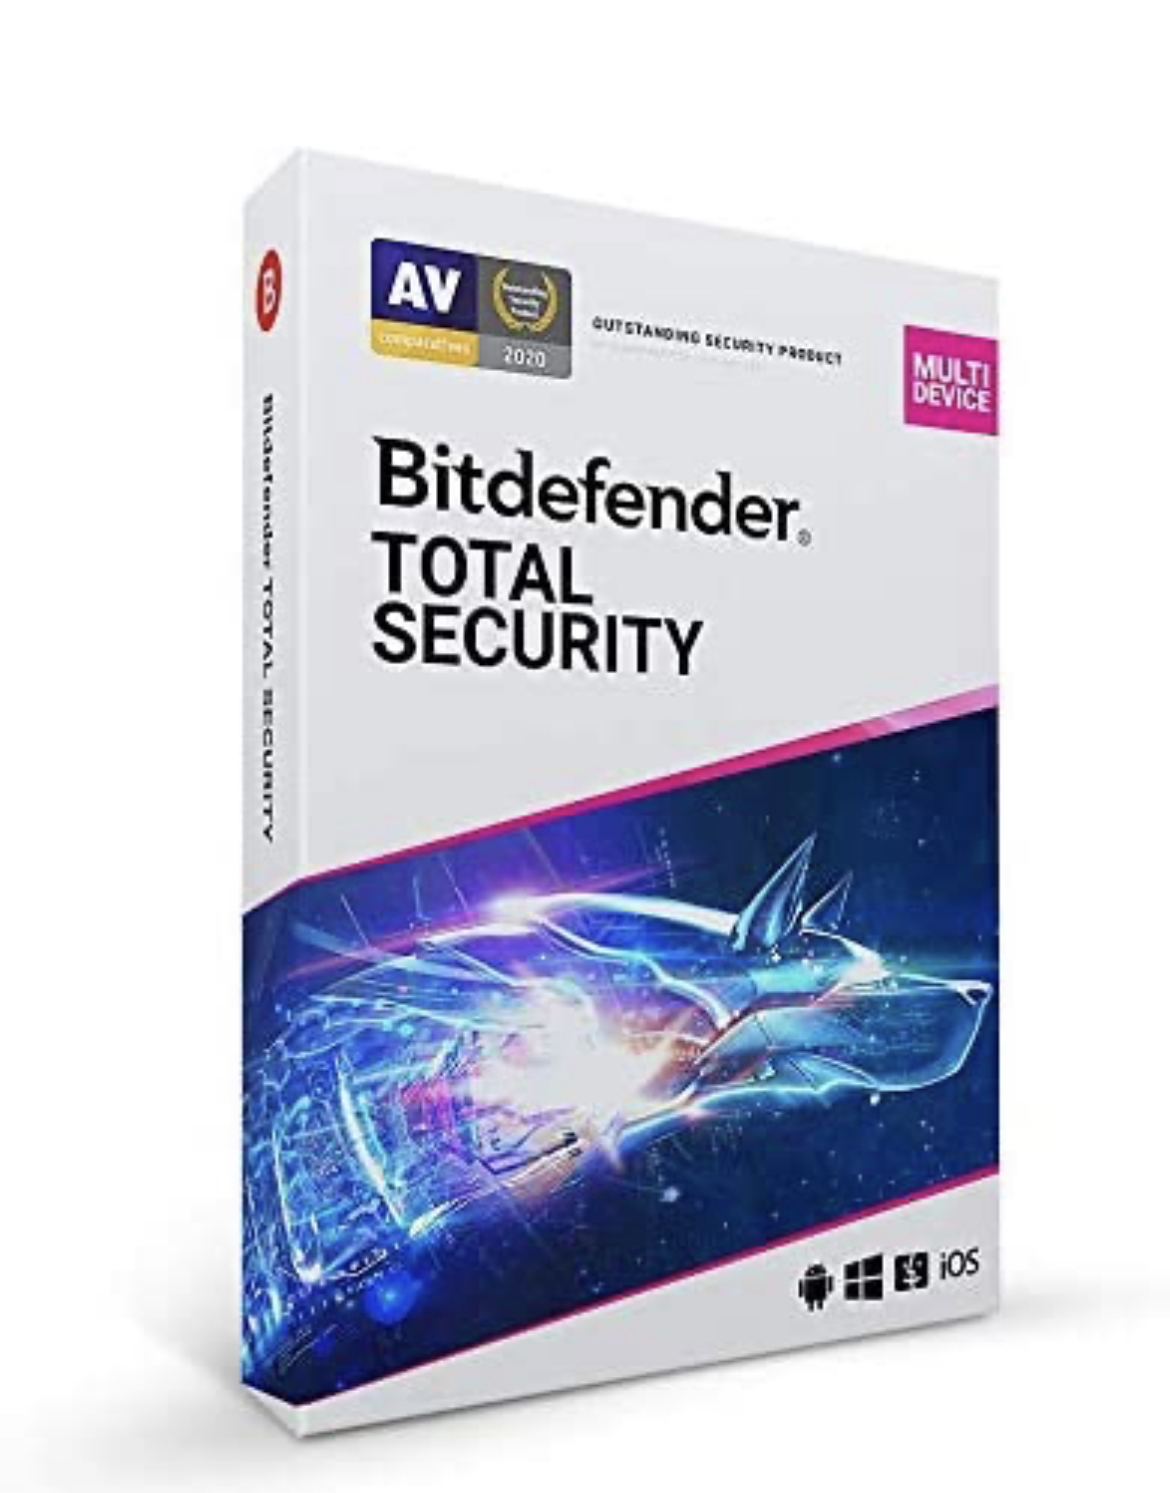 Bitdefender Total Security 2021 - 5 Devices | 1 year Subscription | PC/Mac | Activation Code by Mail $19.99